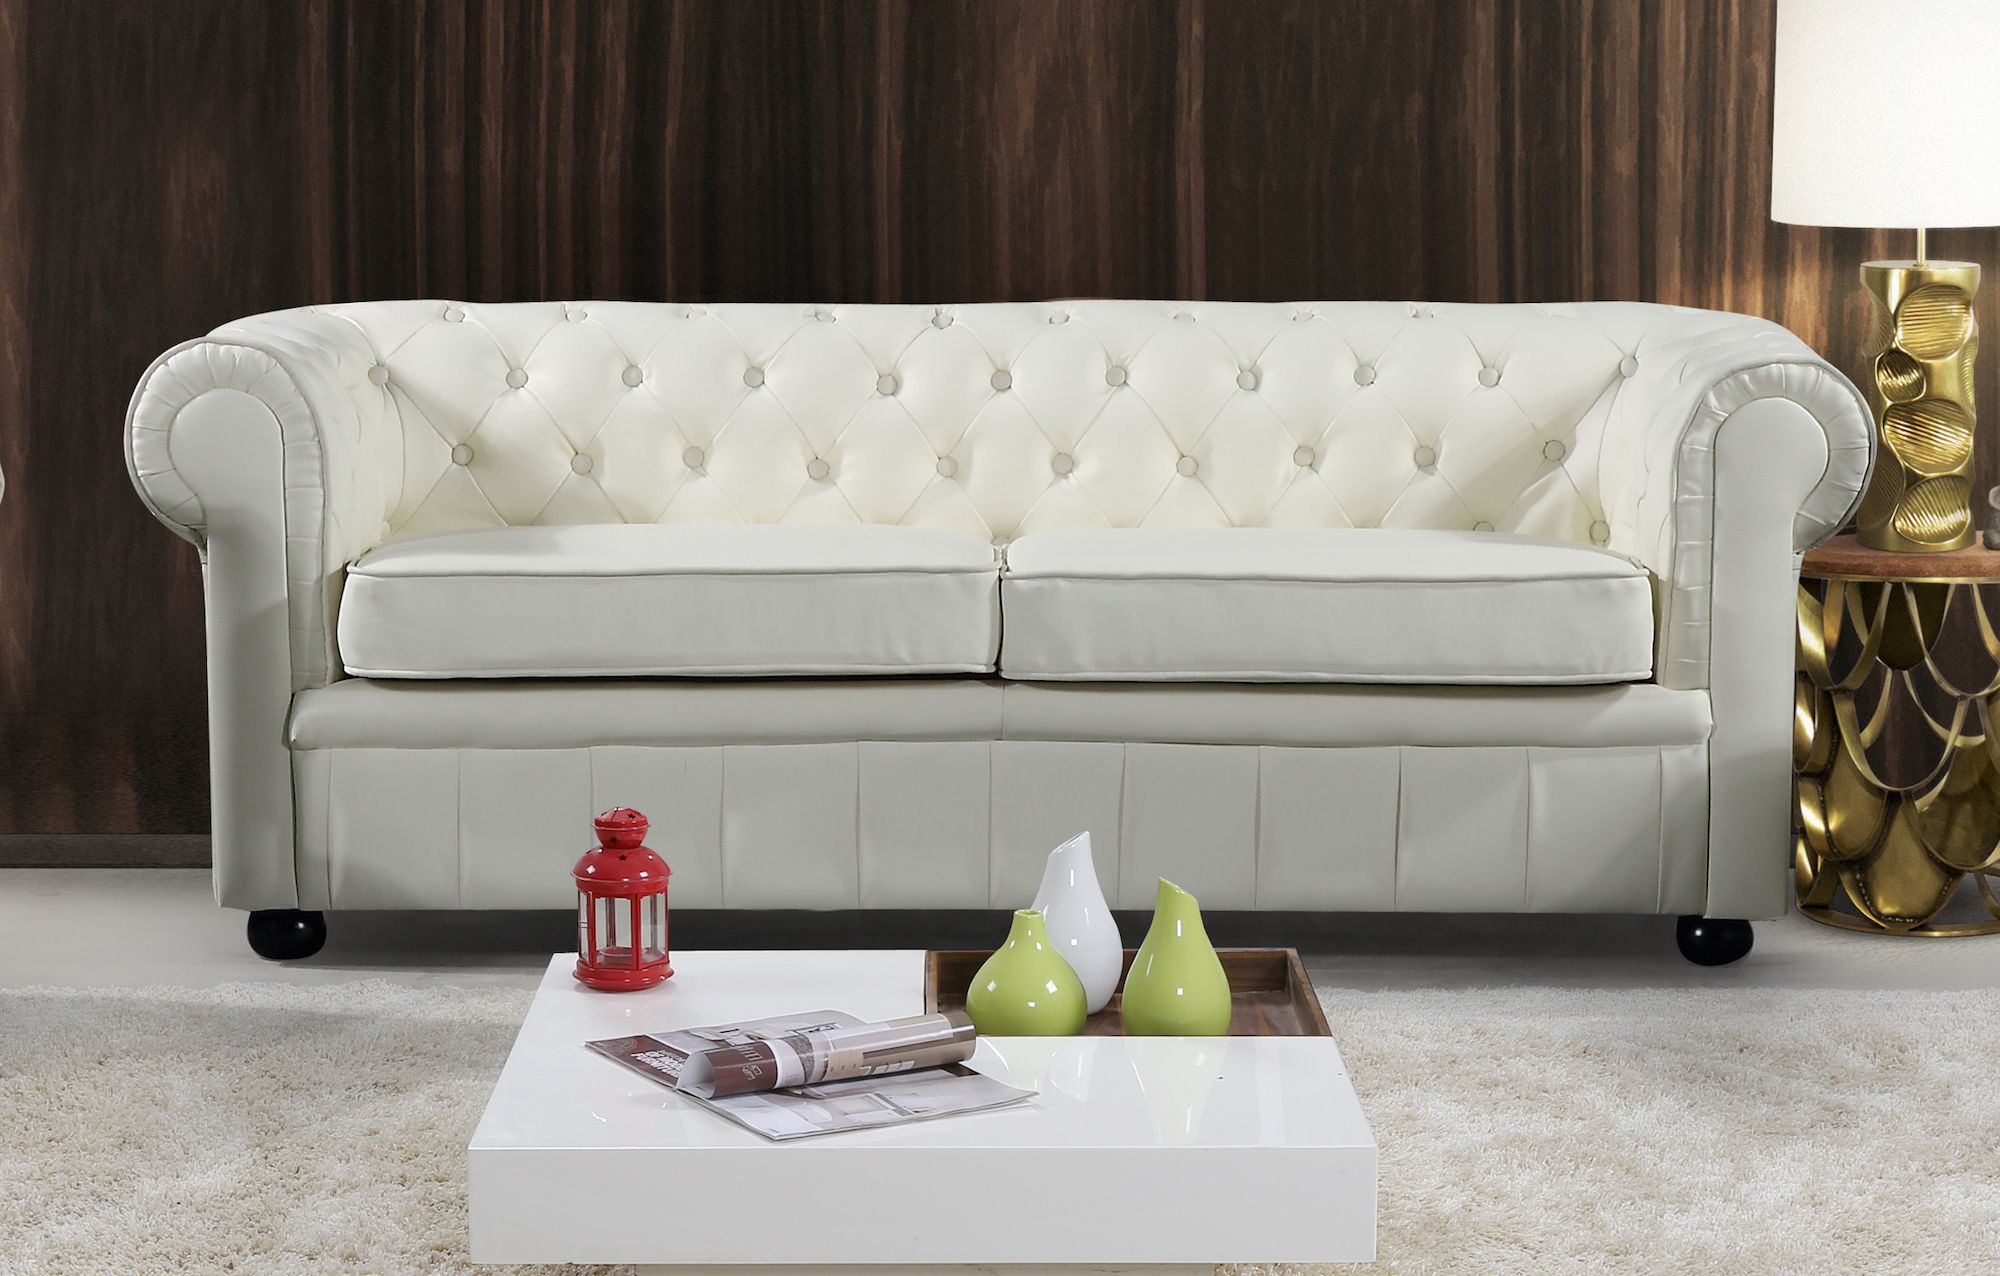 Modern Chesterfield Style Leather Sofa – Cream Leather With Sofas In Cream (Gallery 13 of 20)